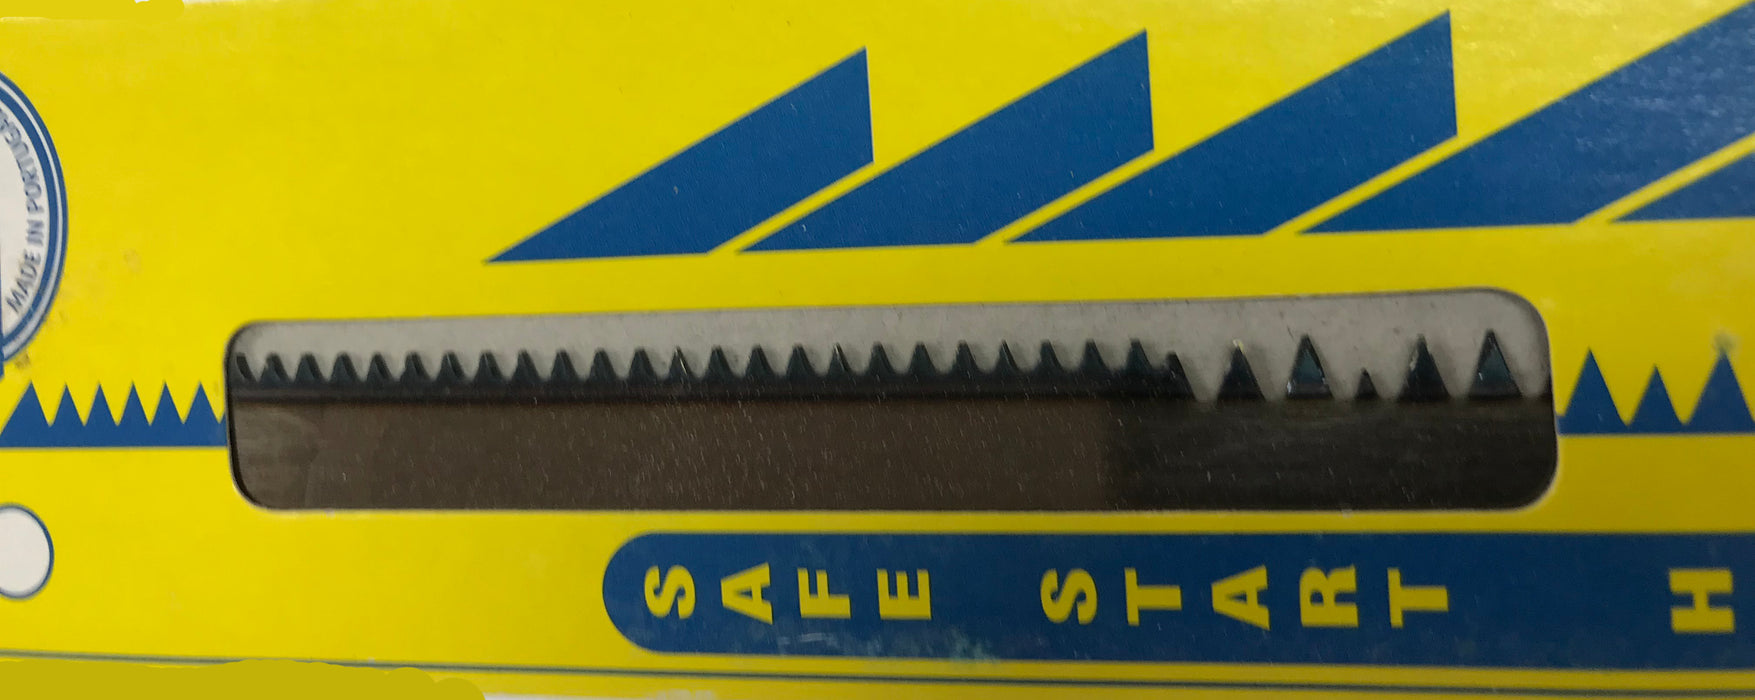 Bow Saw Replacement Blade - SmartCut  - Tri tooth - 21"